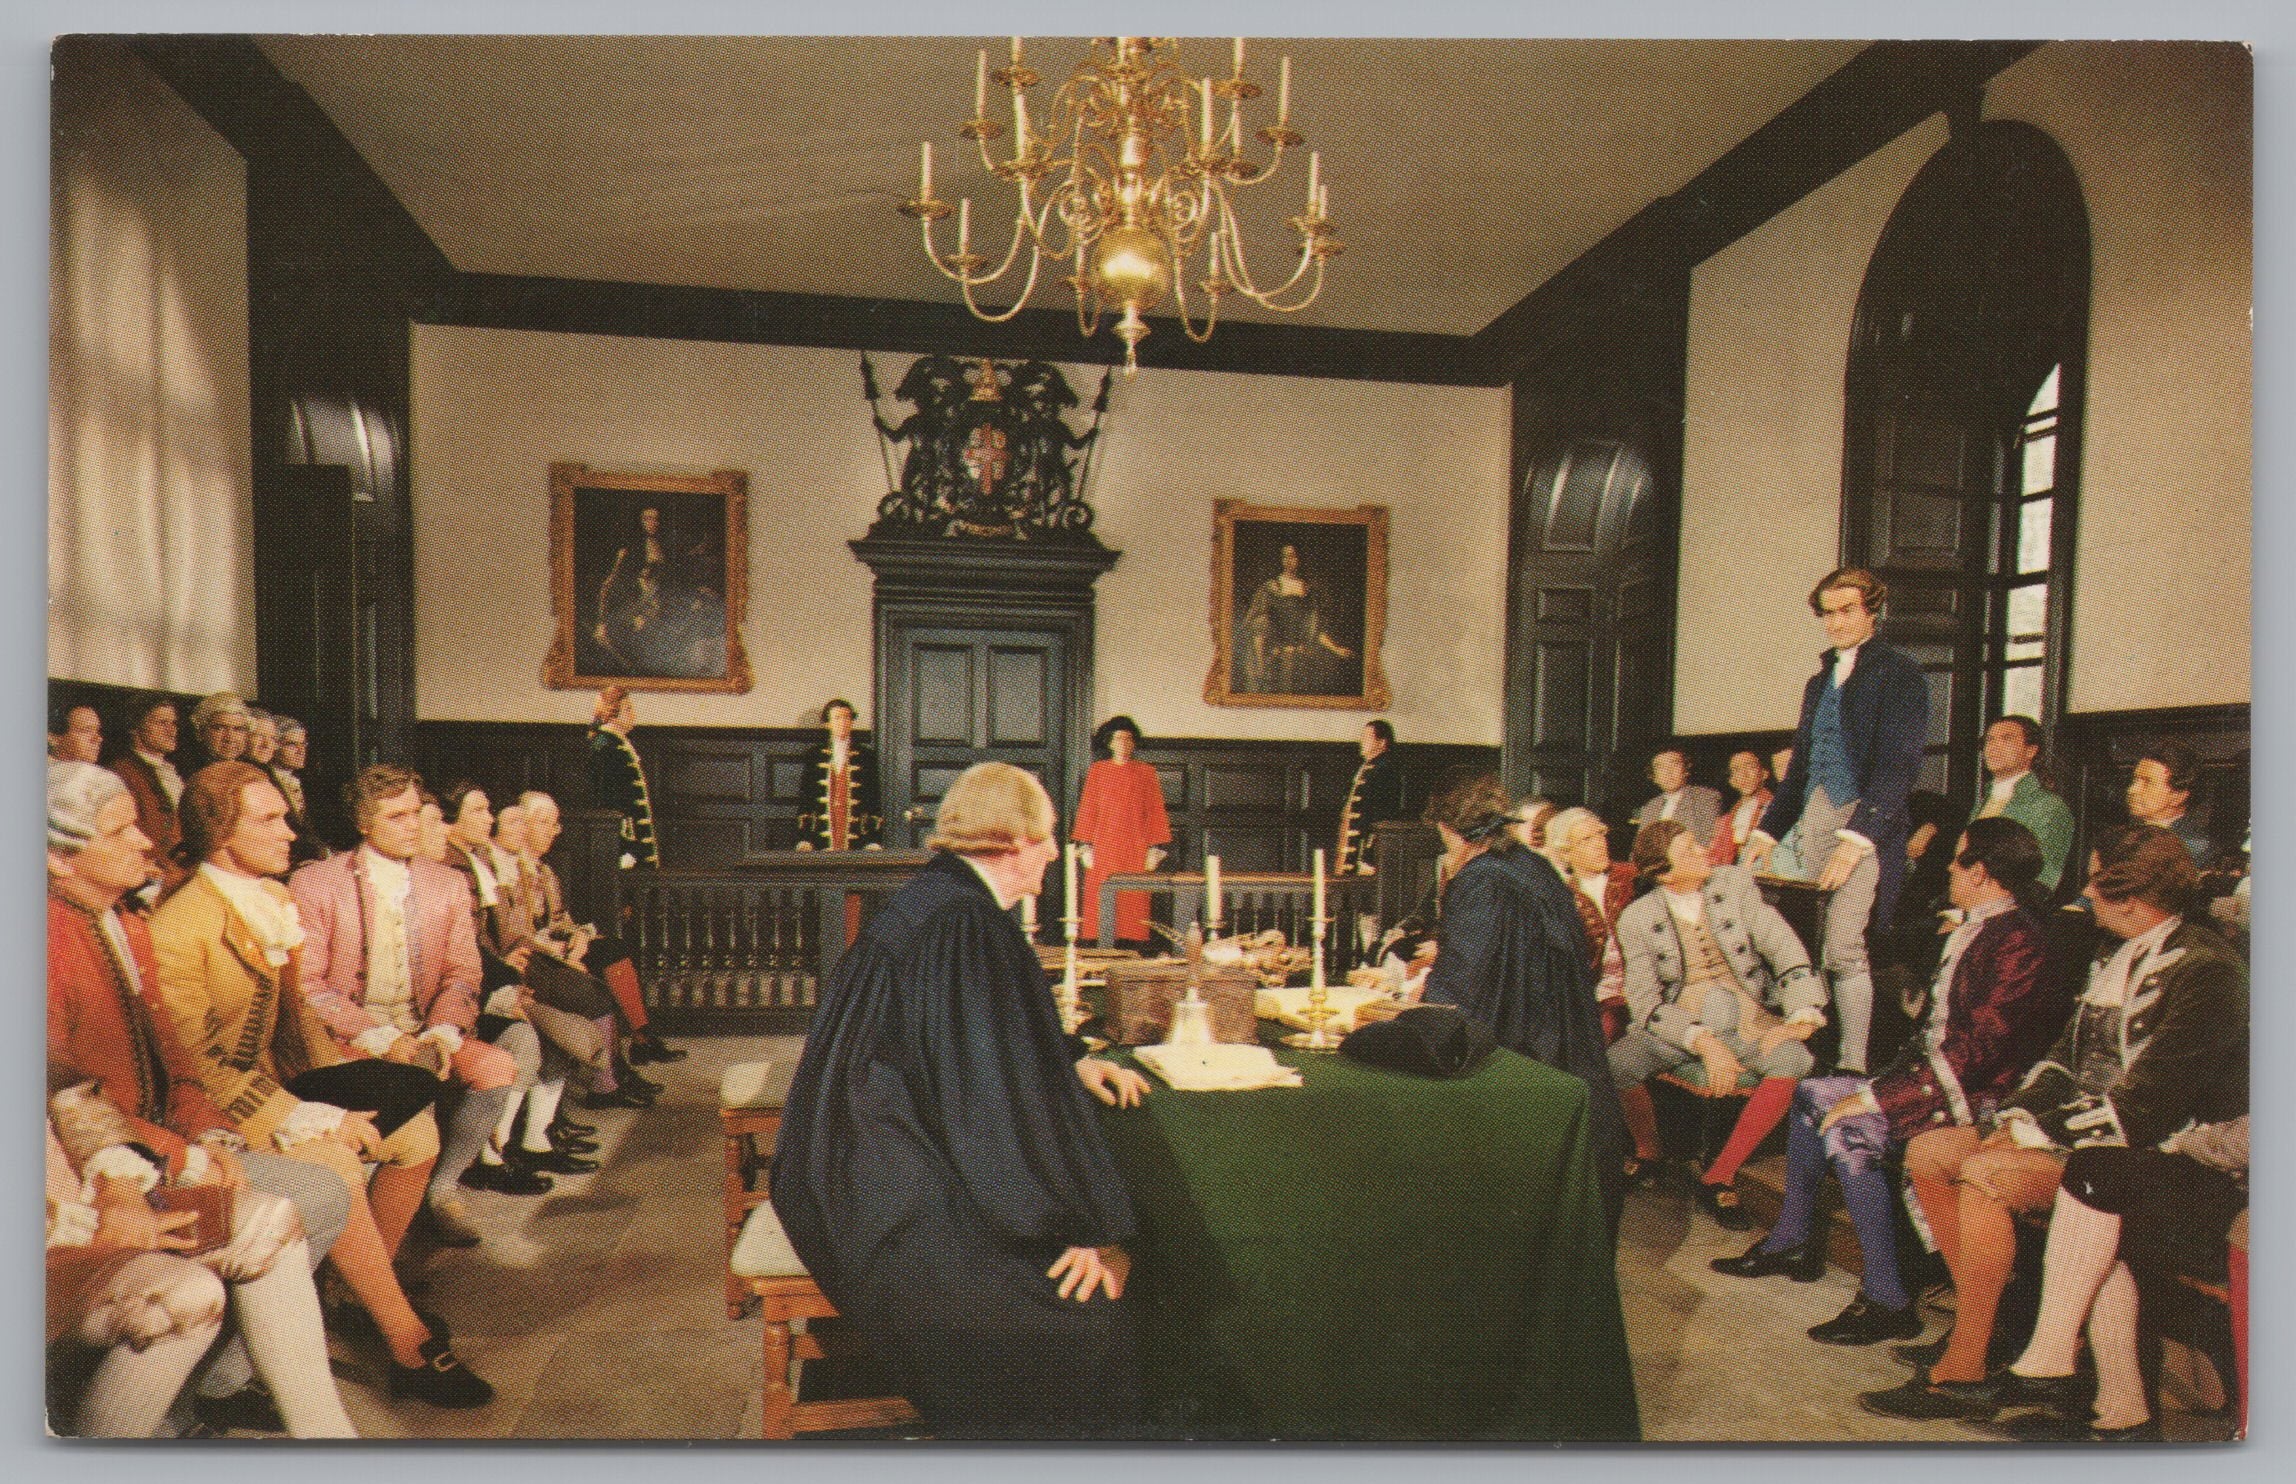 Patrick Henry In The Virginia House Of Burgesses, Vintage Post Card.